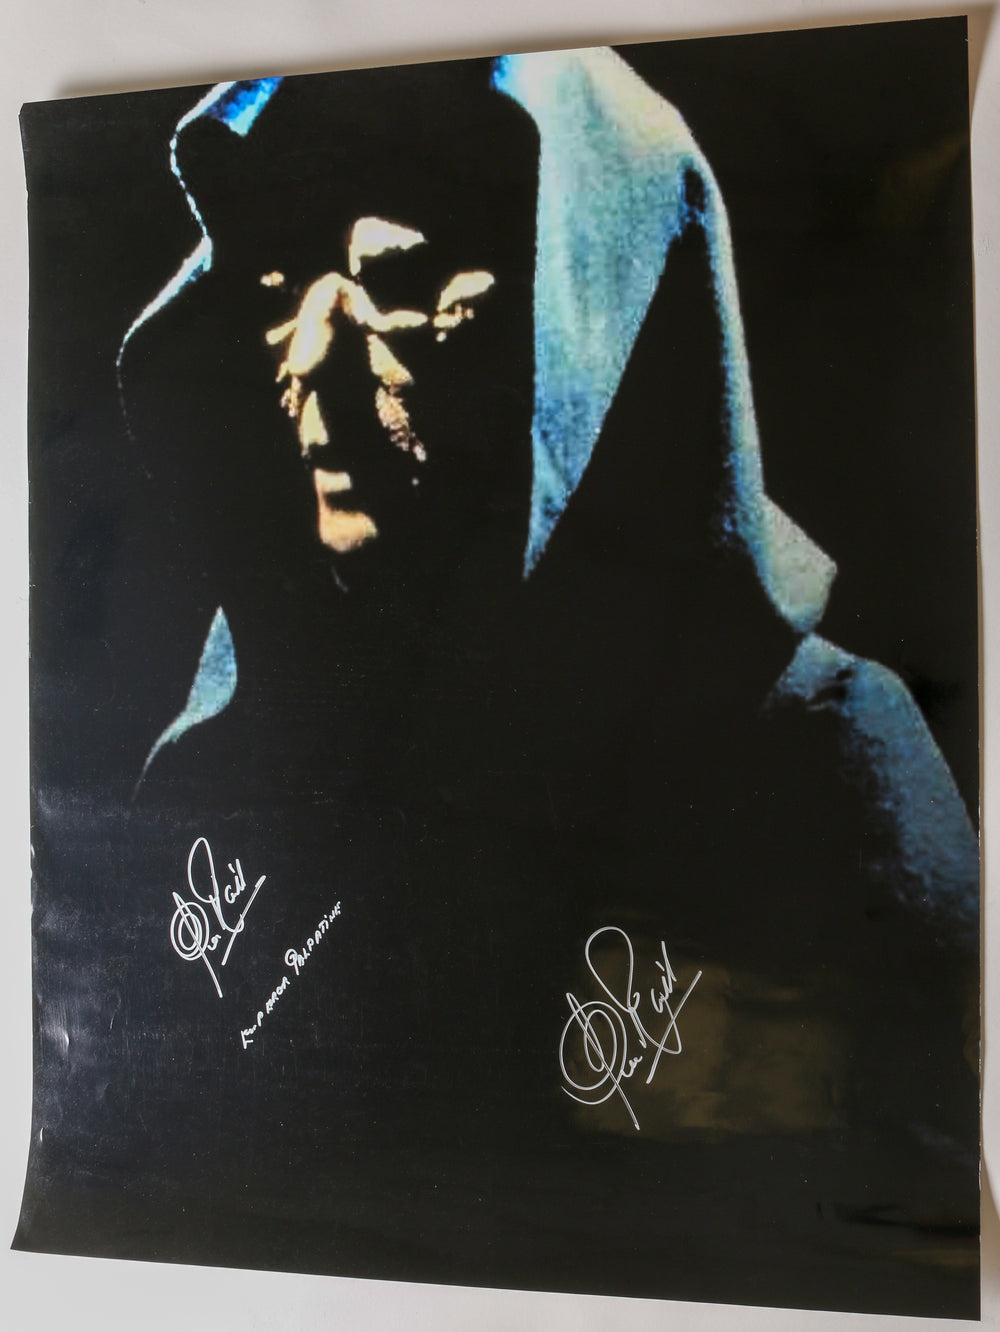 Clive Revill as Emperor Palpatine in Star Wars: The Empire Strikes Back Signed 24x30 Poster with Character Name